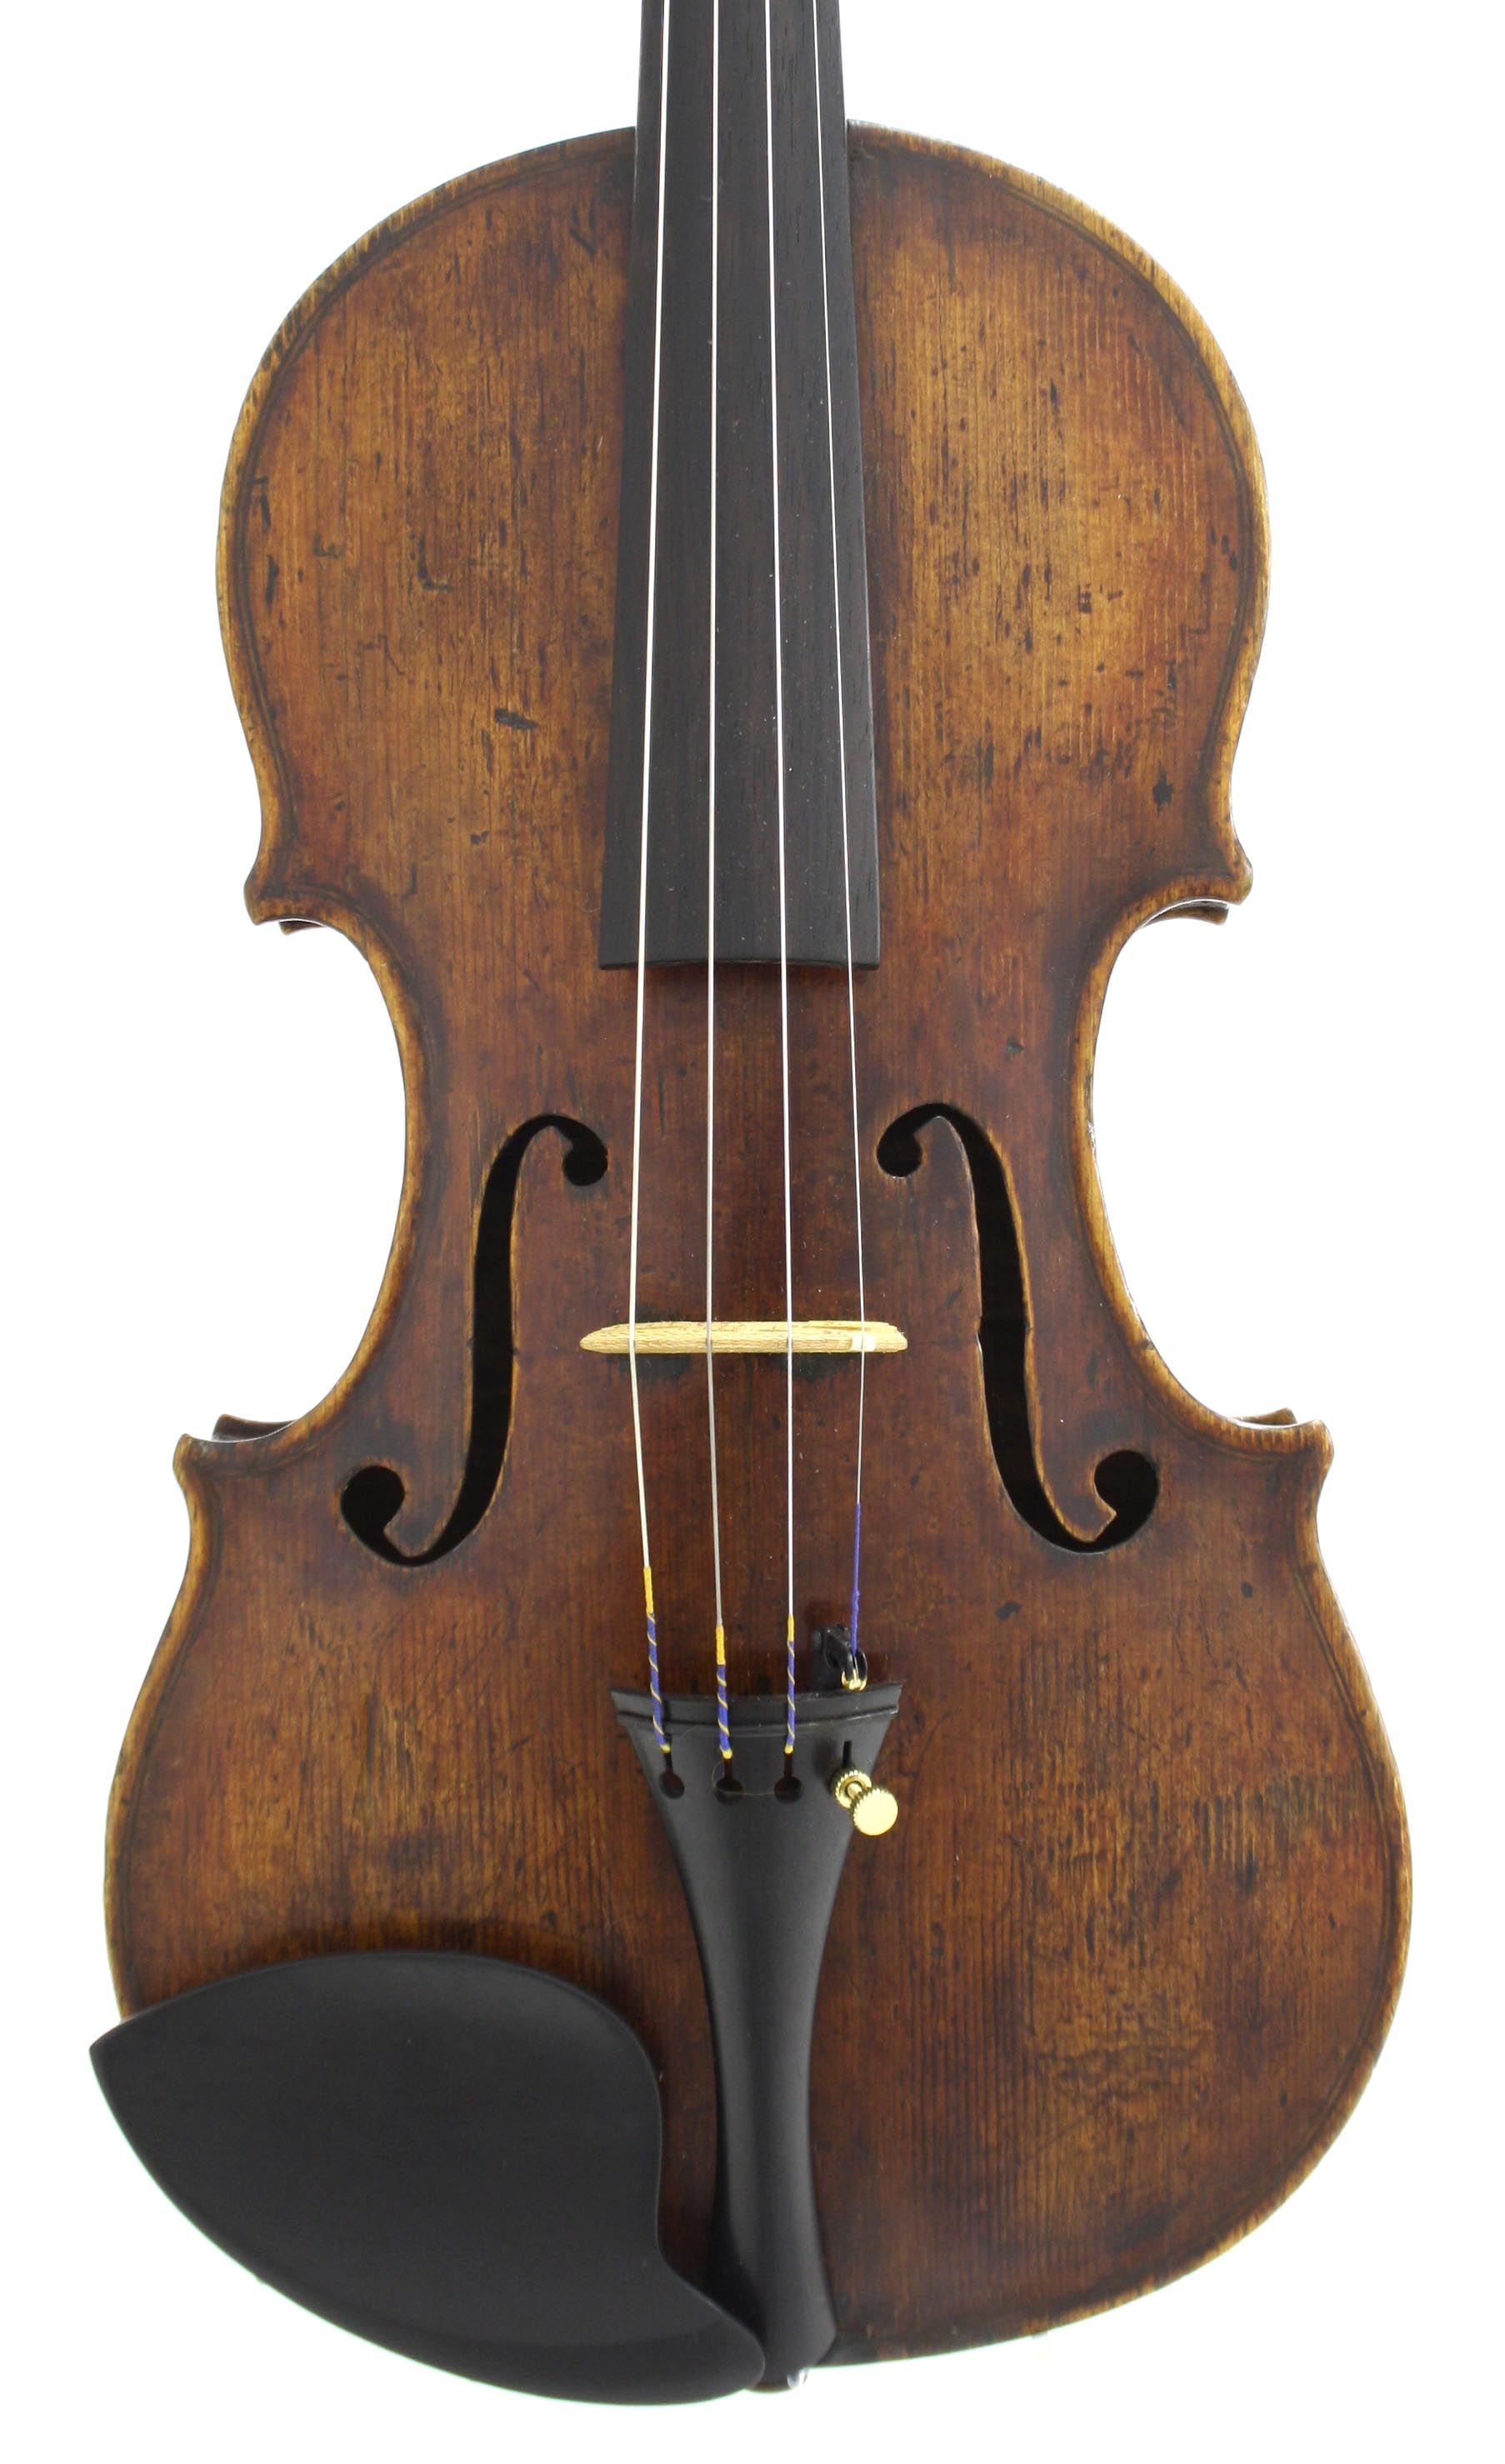 Violin circa 1880, the one piece back of faint medium curl with similar wood to the sides, the